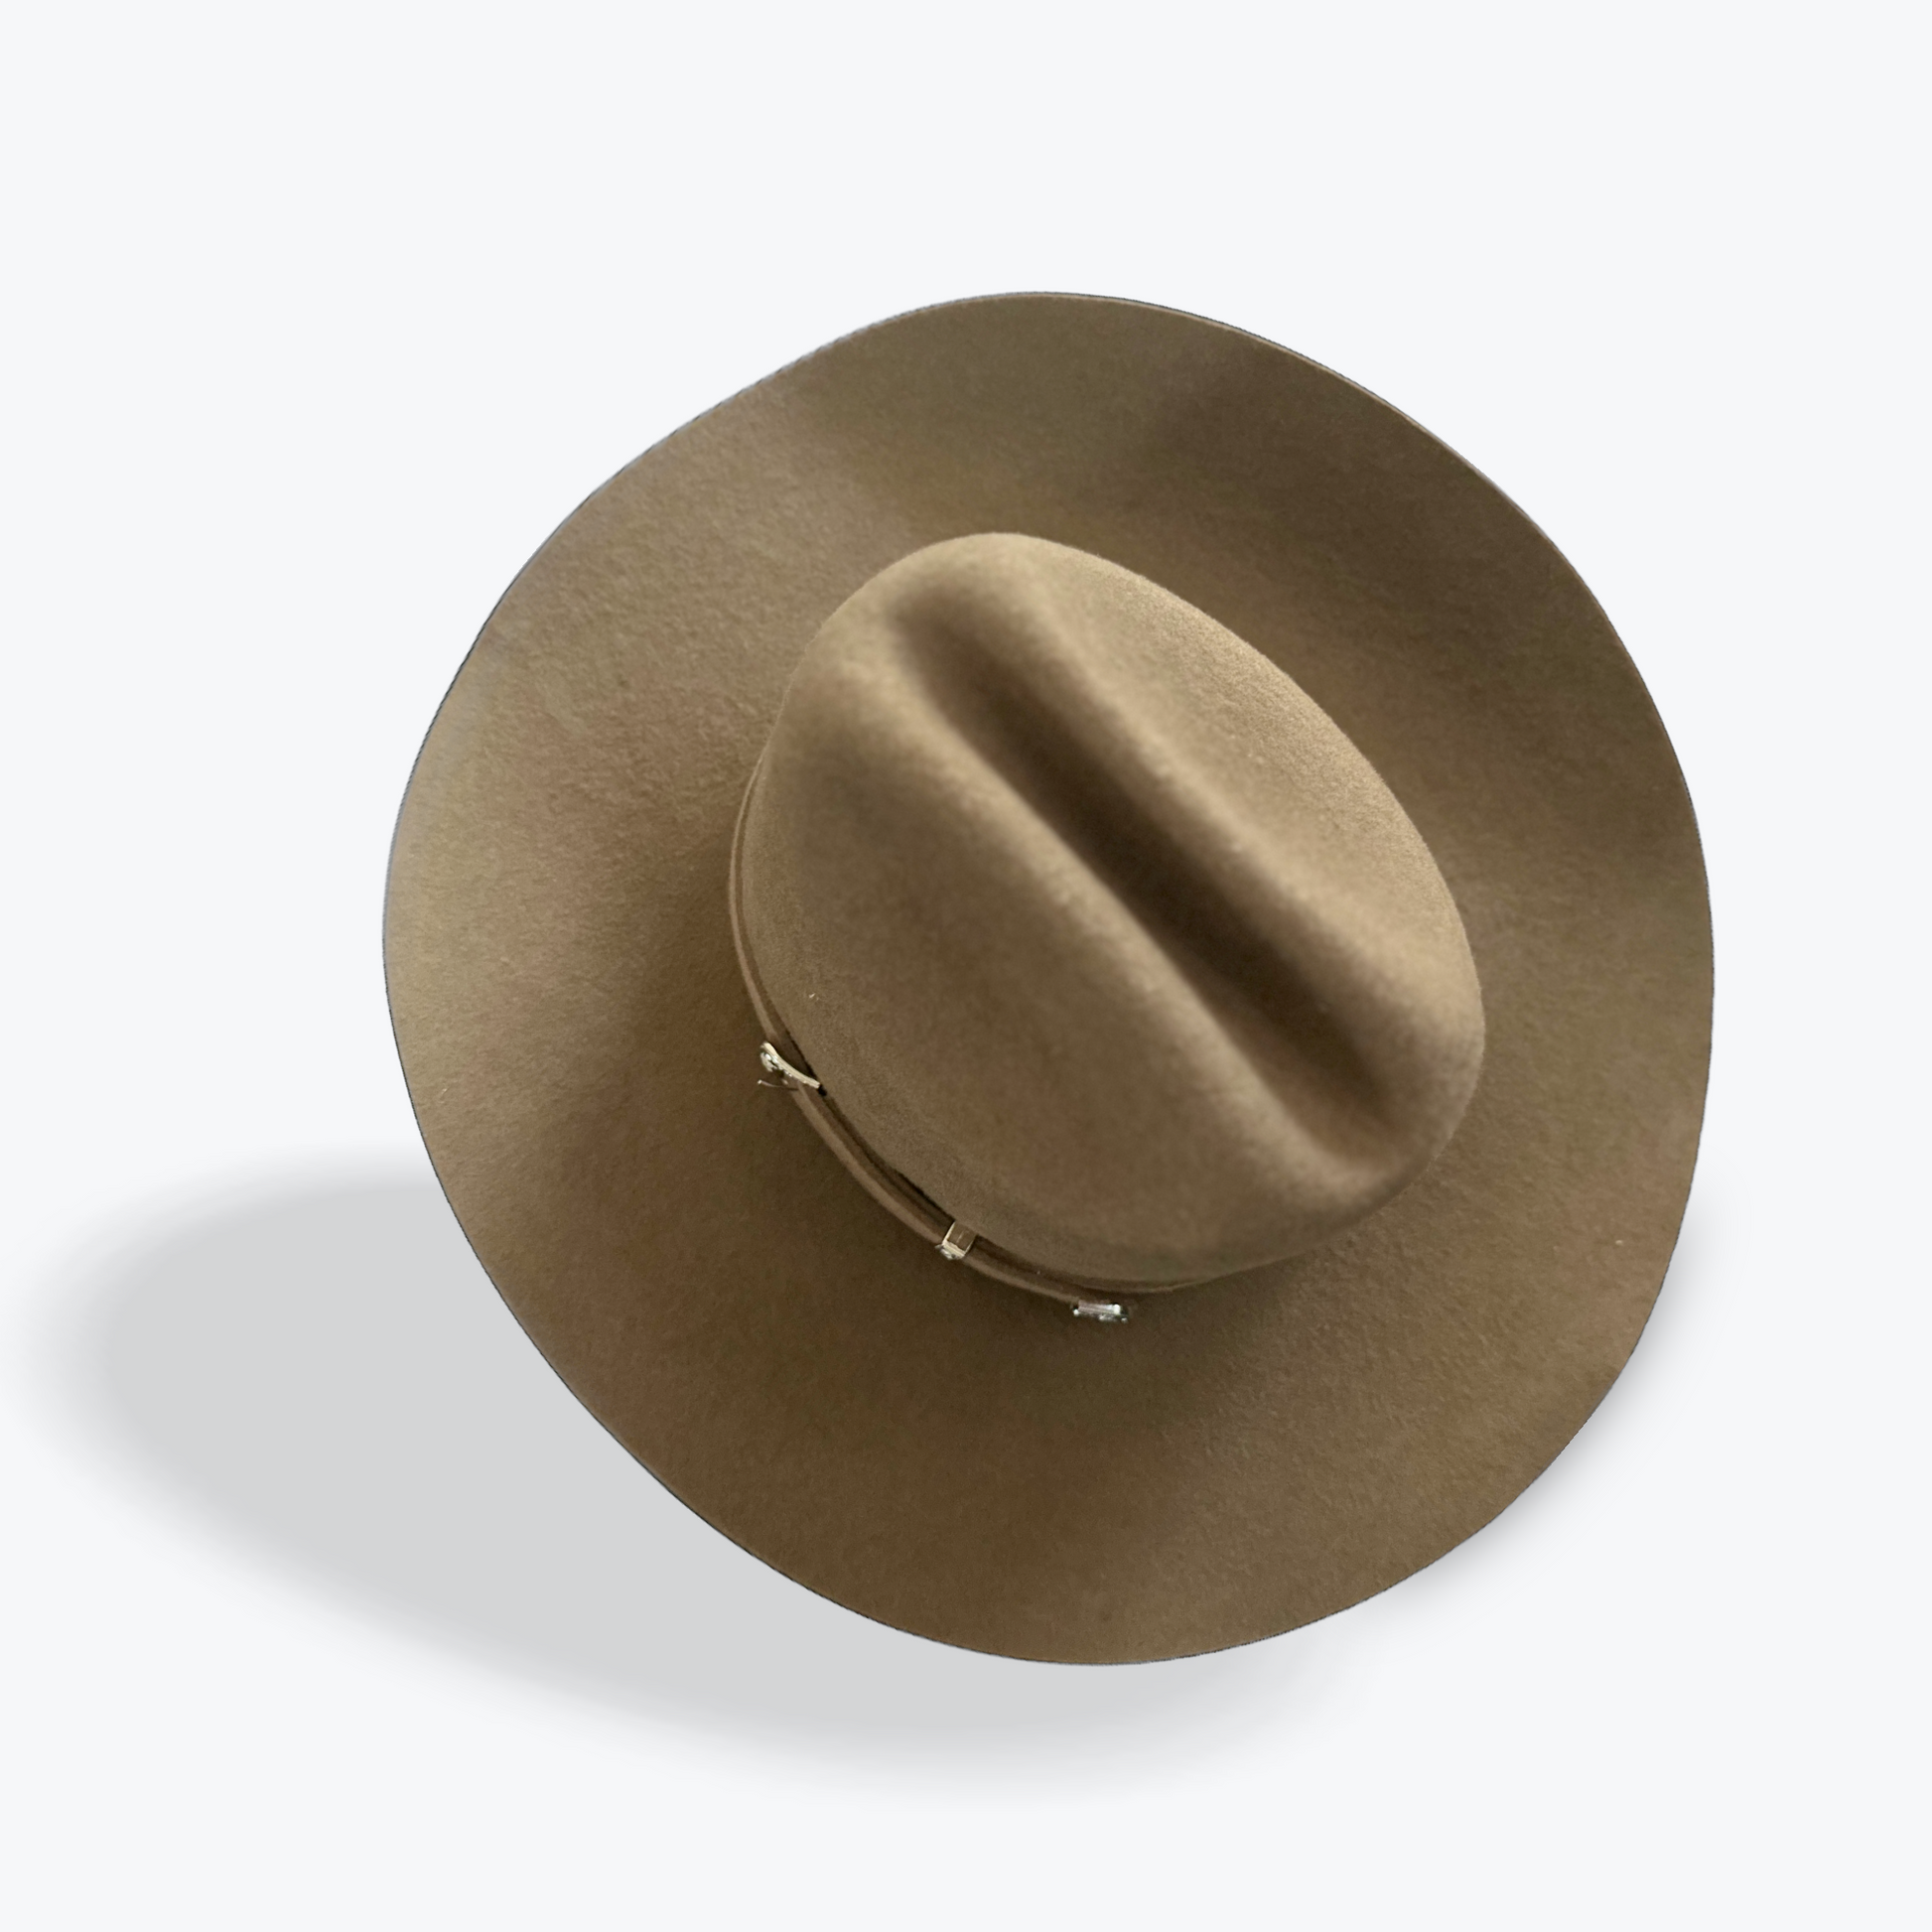 THE WOOL COWBOY HAT The Hip Hat